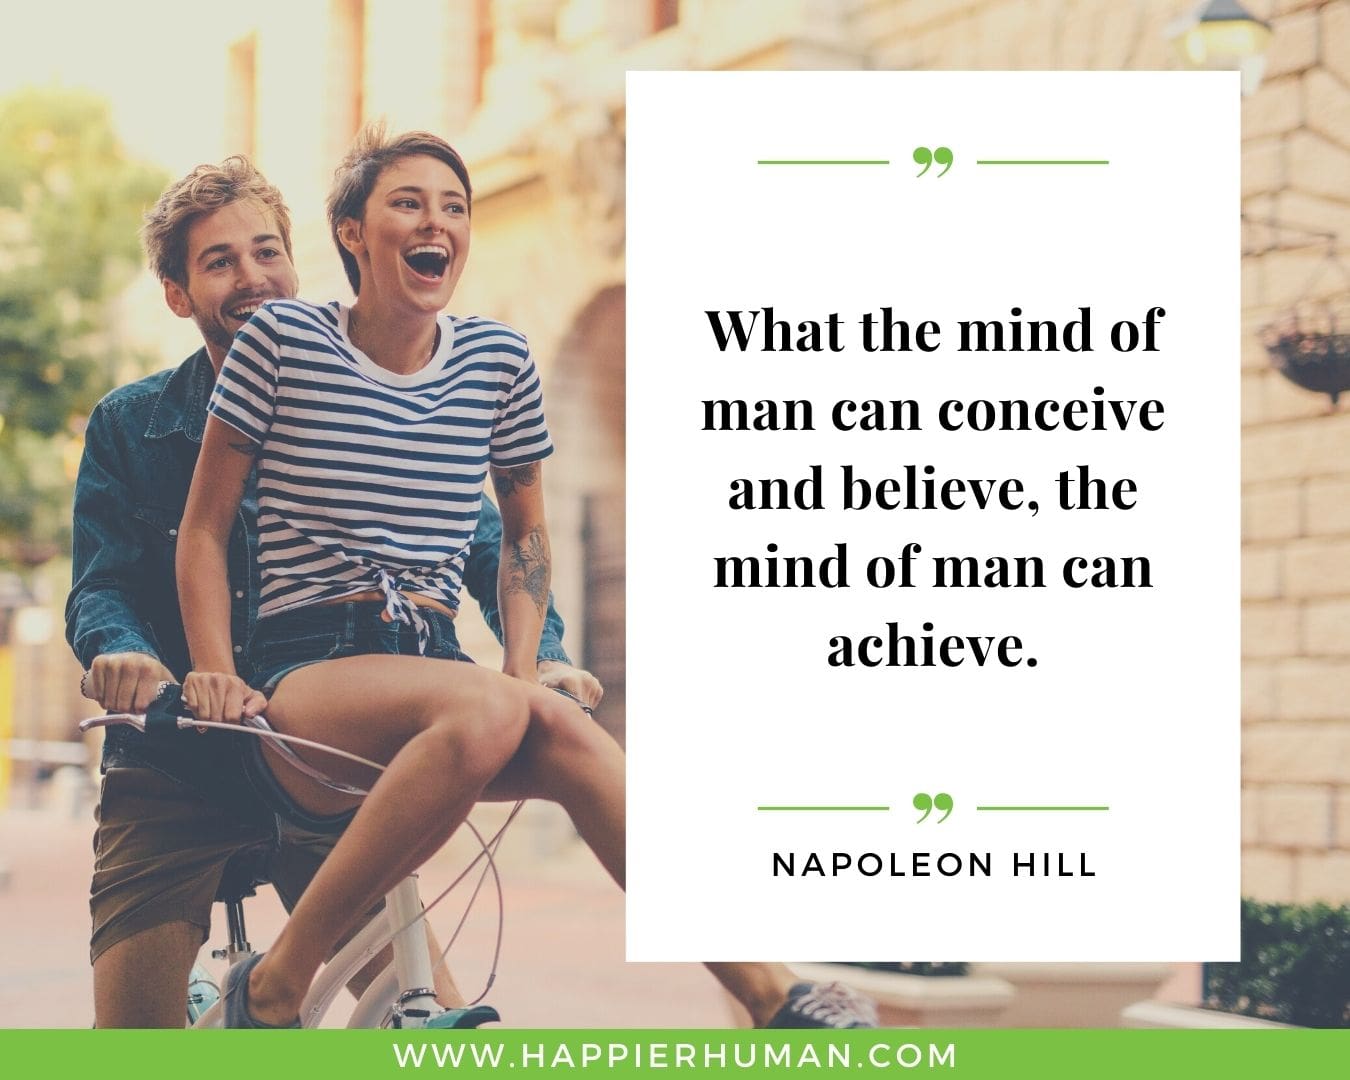 Positive Energy Quotes - “What the mind of man can conceive and believe, the mind of man can achieve.” - Napoleon Hill